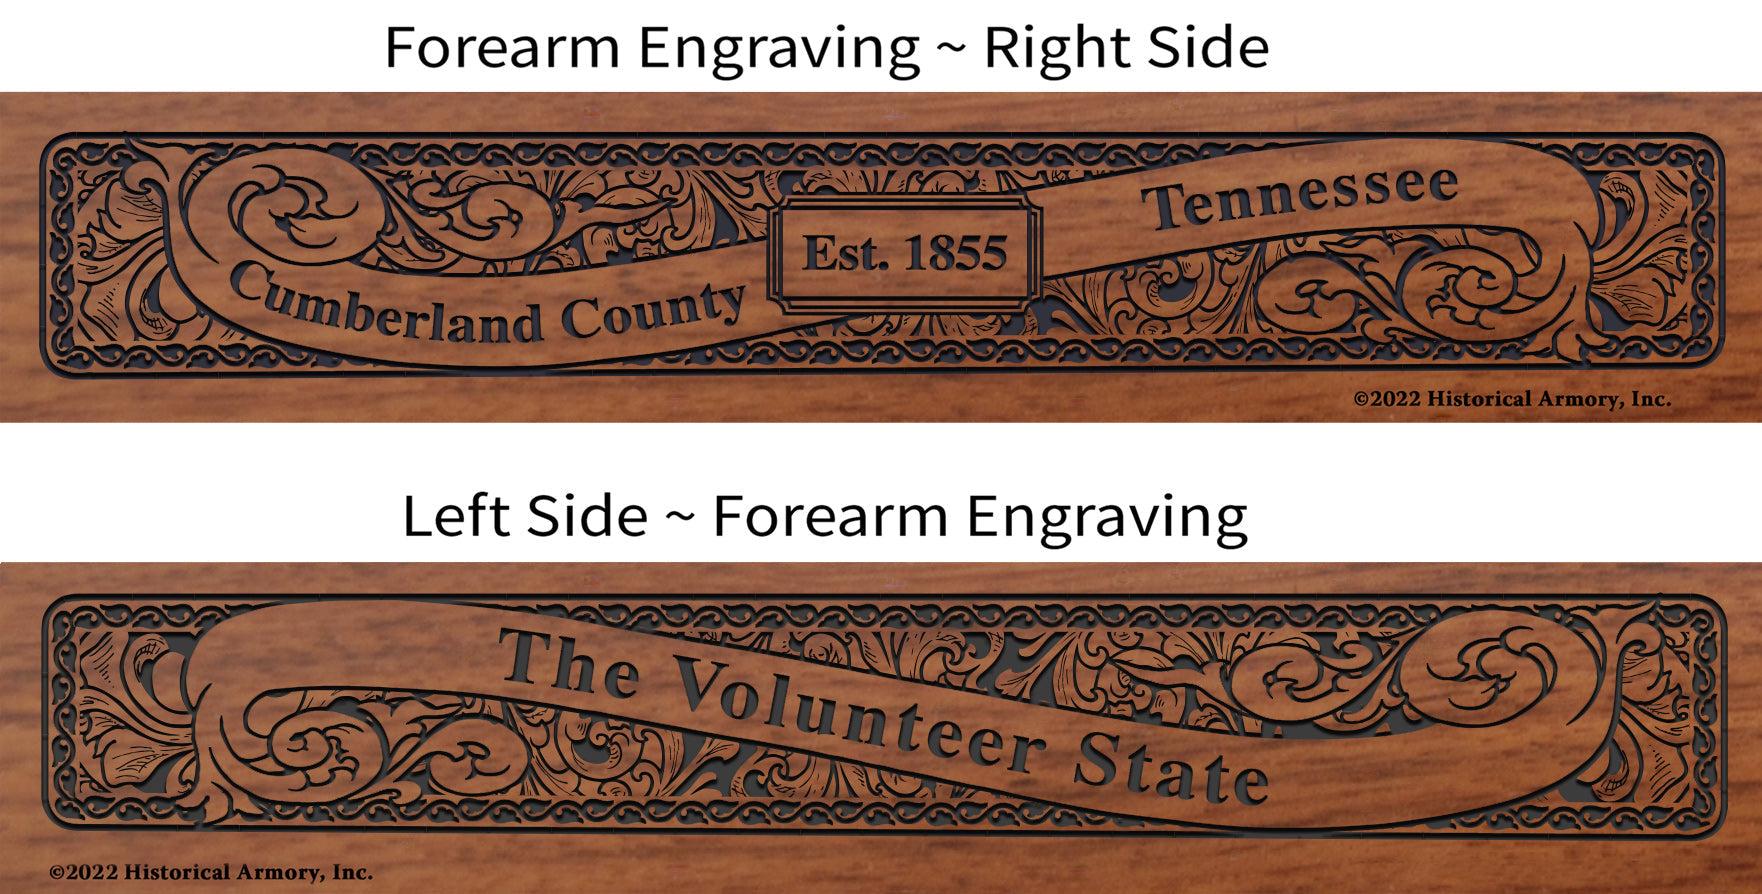 Cumberland County Tennessee Engraved Rifle Forearm